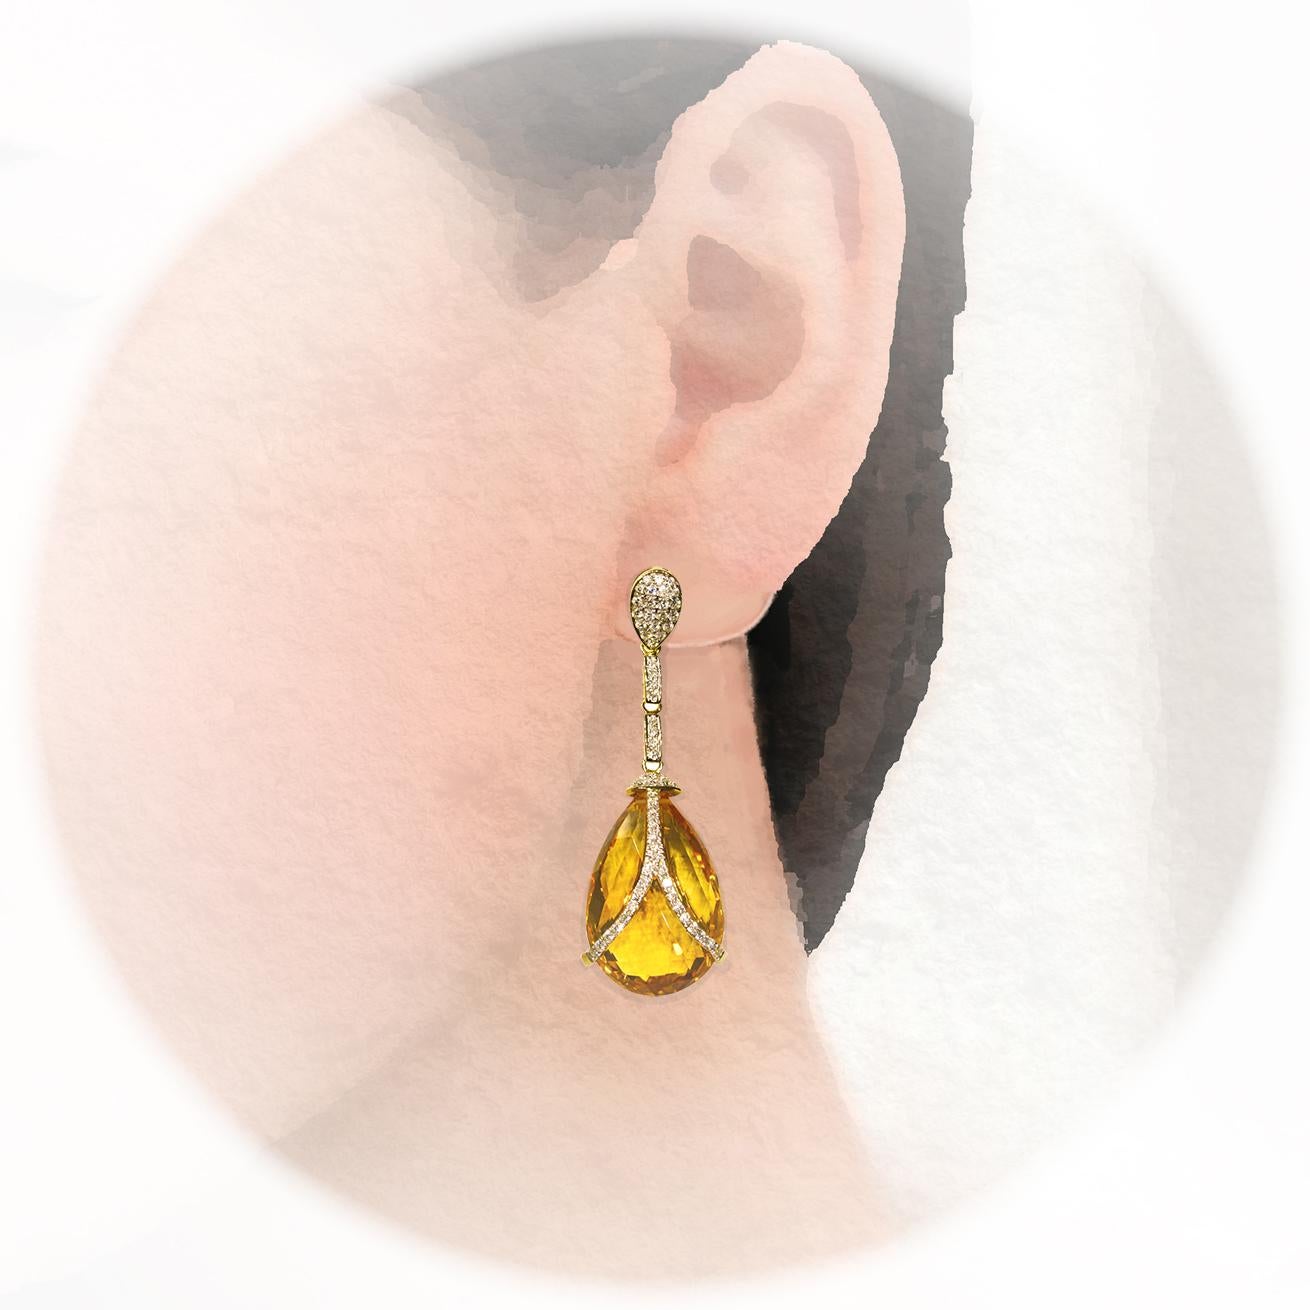 Statement piece. Lively yellow, pear shape, checkered pattern faceted 40.98 carats citrine dangling earrings, contemporary design, accented with sparkling round brilliant cut diamonds, handcrafted in 14 karat yellow gold with screw back post.  These